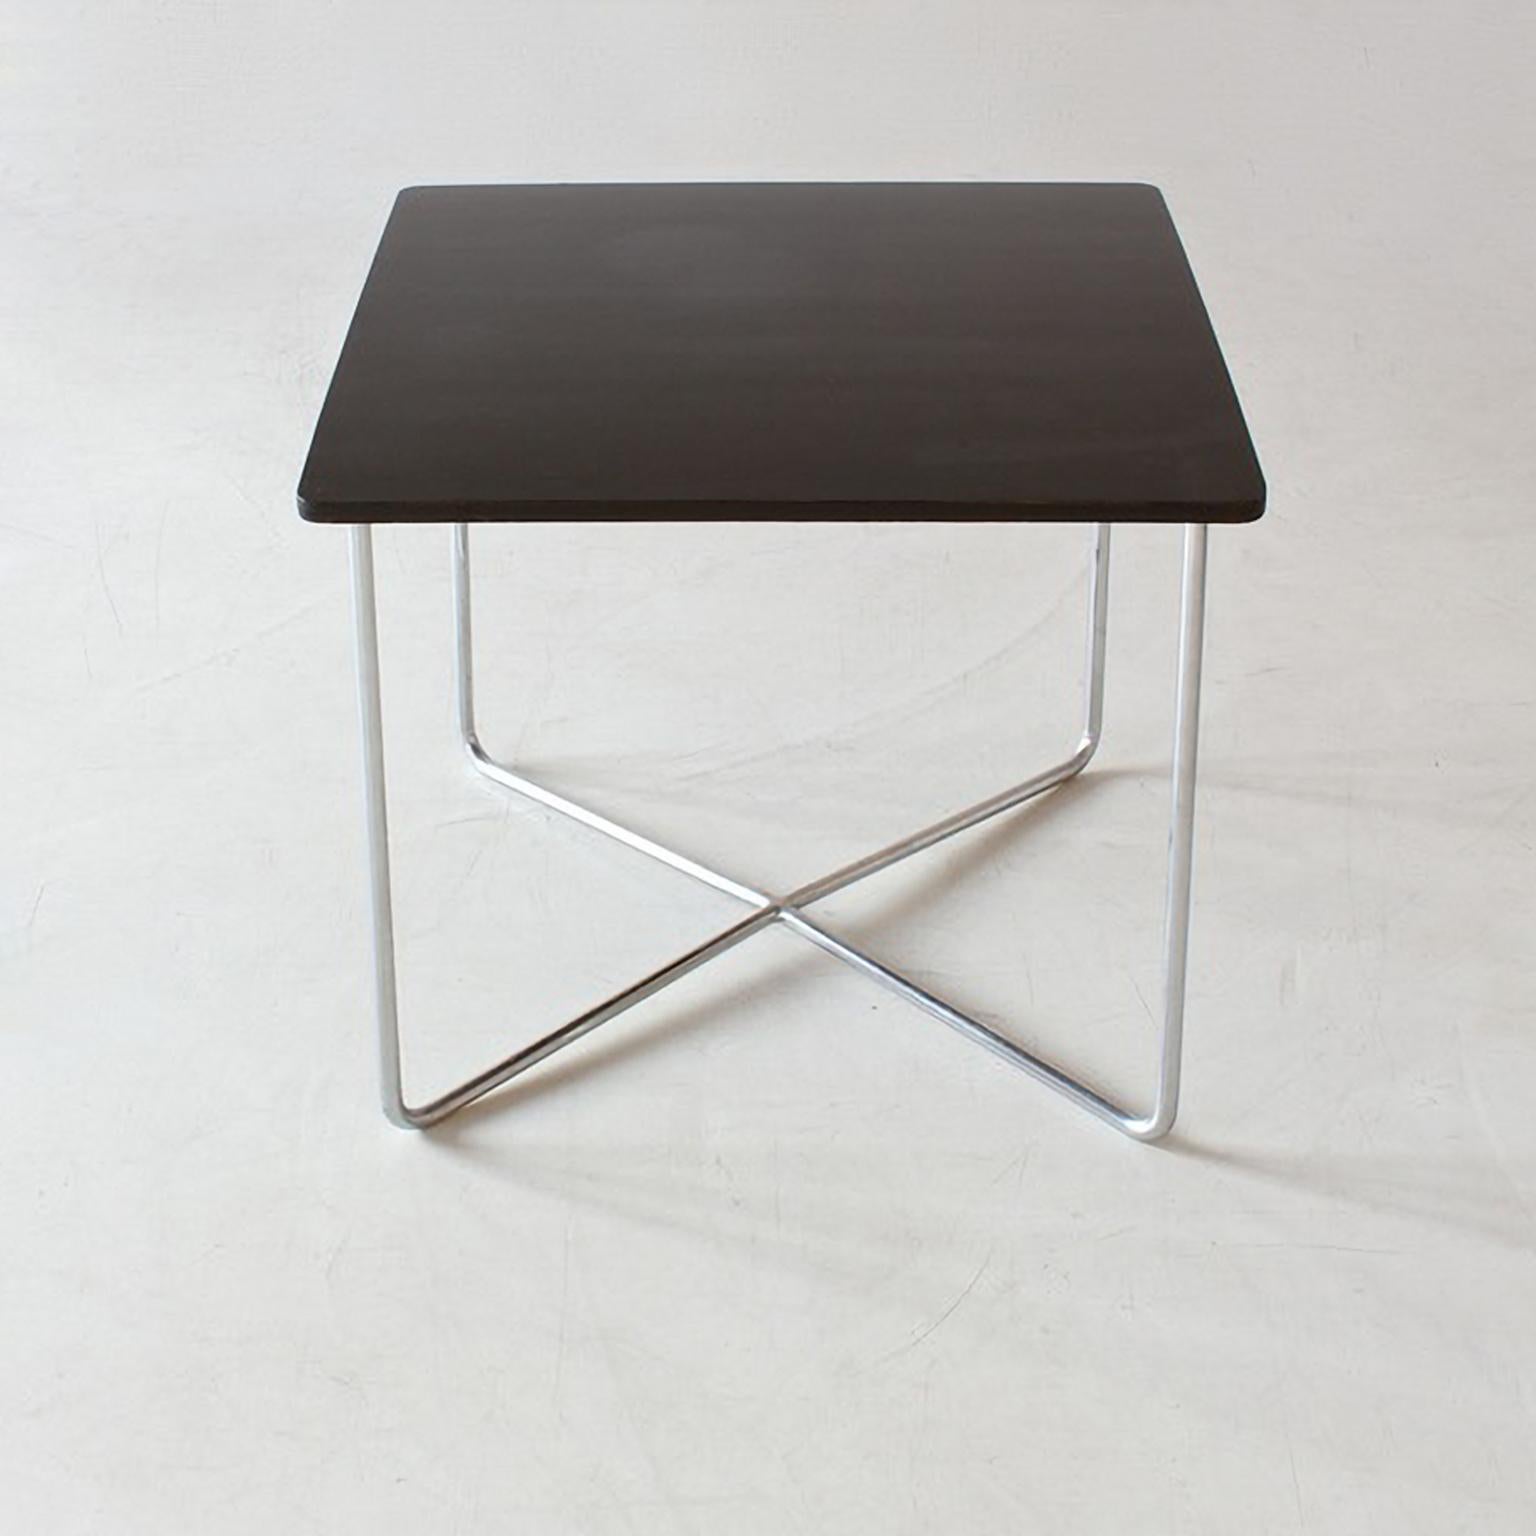 Bauhaus Rectangular Tubular Steel Table, Chromed Metal, Lacquered Wood, C. 1935 In Good Condition For Sale In Berlin, DE